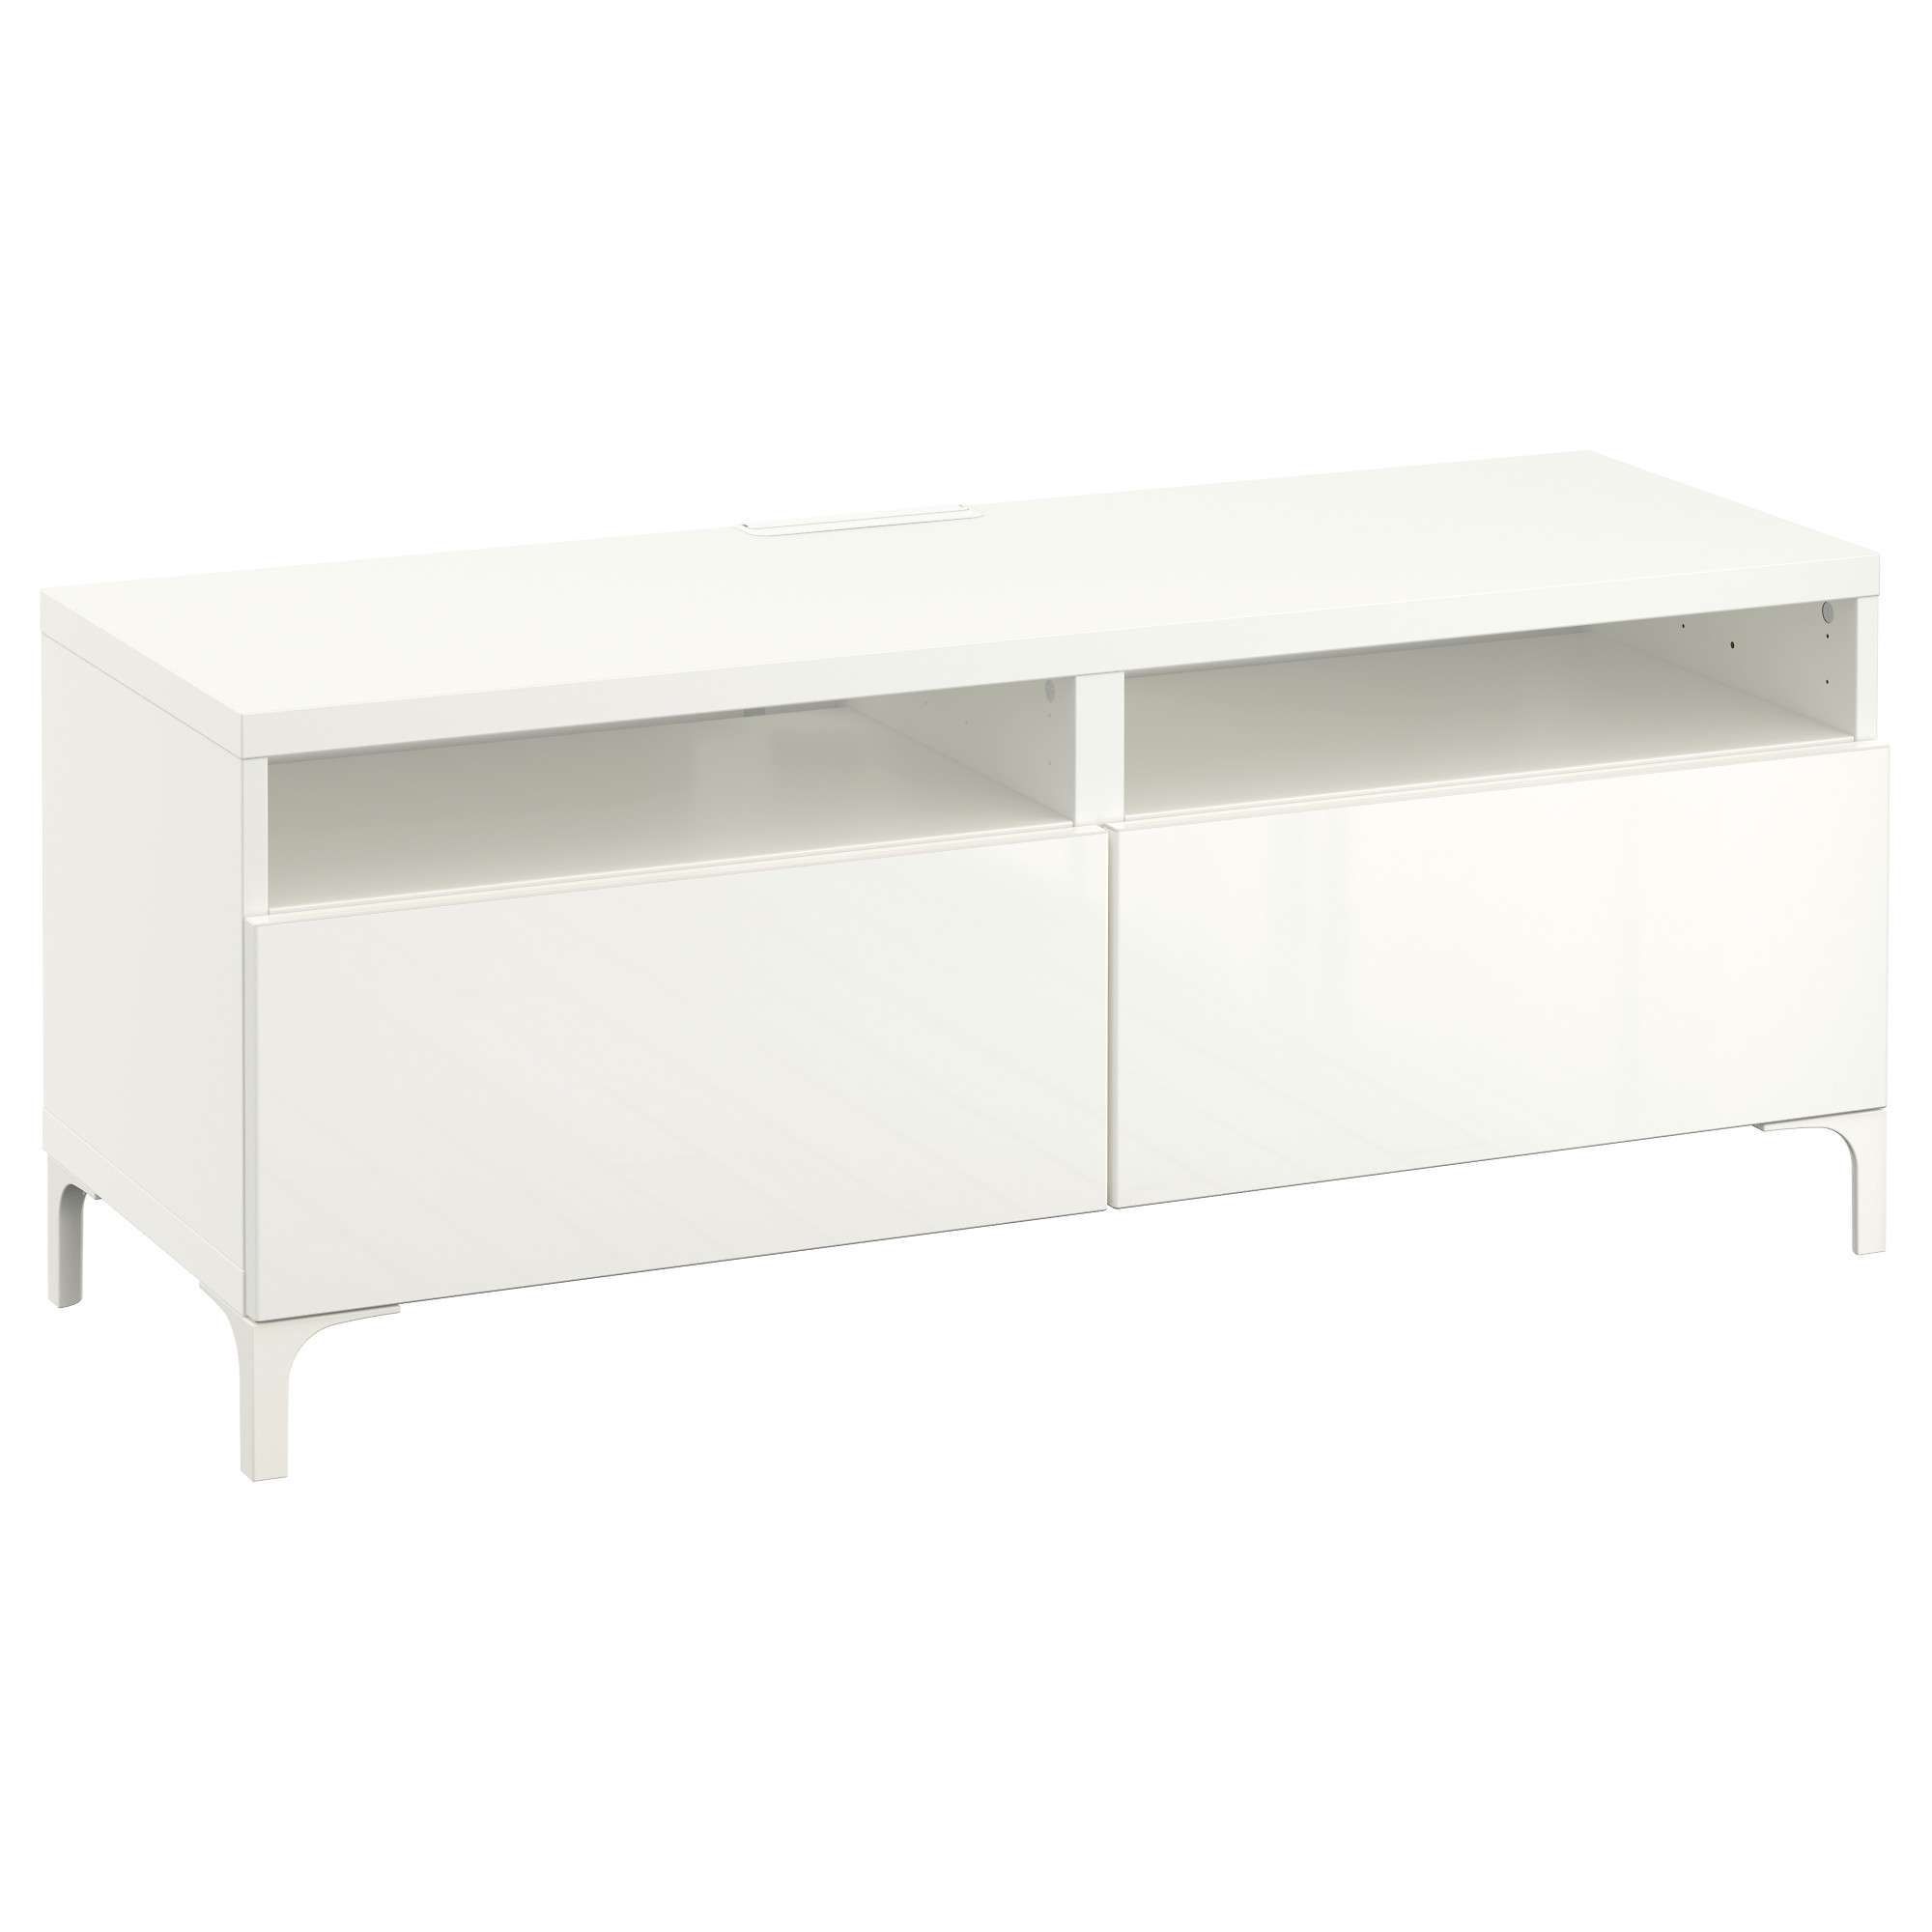 Bestå Tv Unit With Drawers – White/selsviken High Gloss/white Inside White Gloss Tv Stands With Drawers (View 13 of 15)